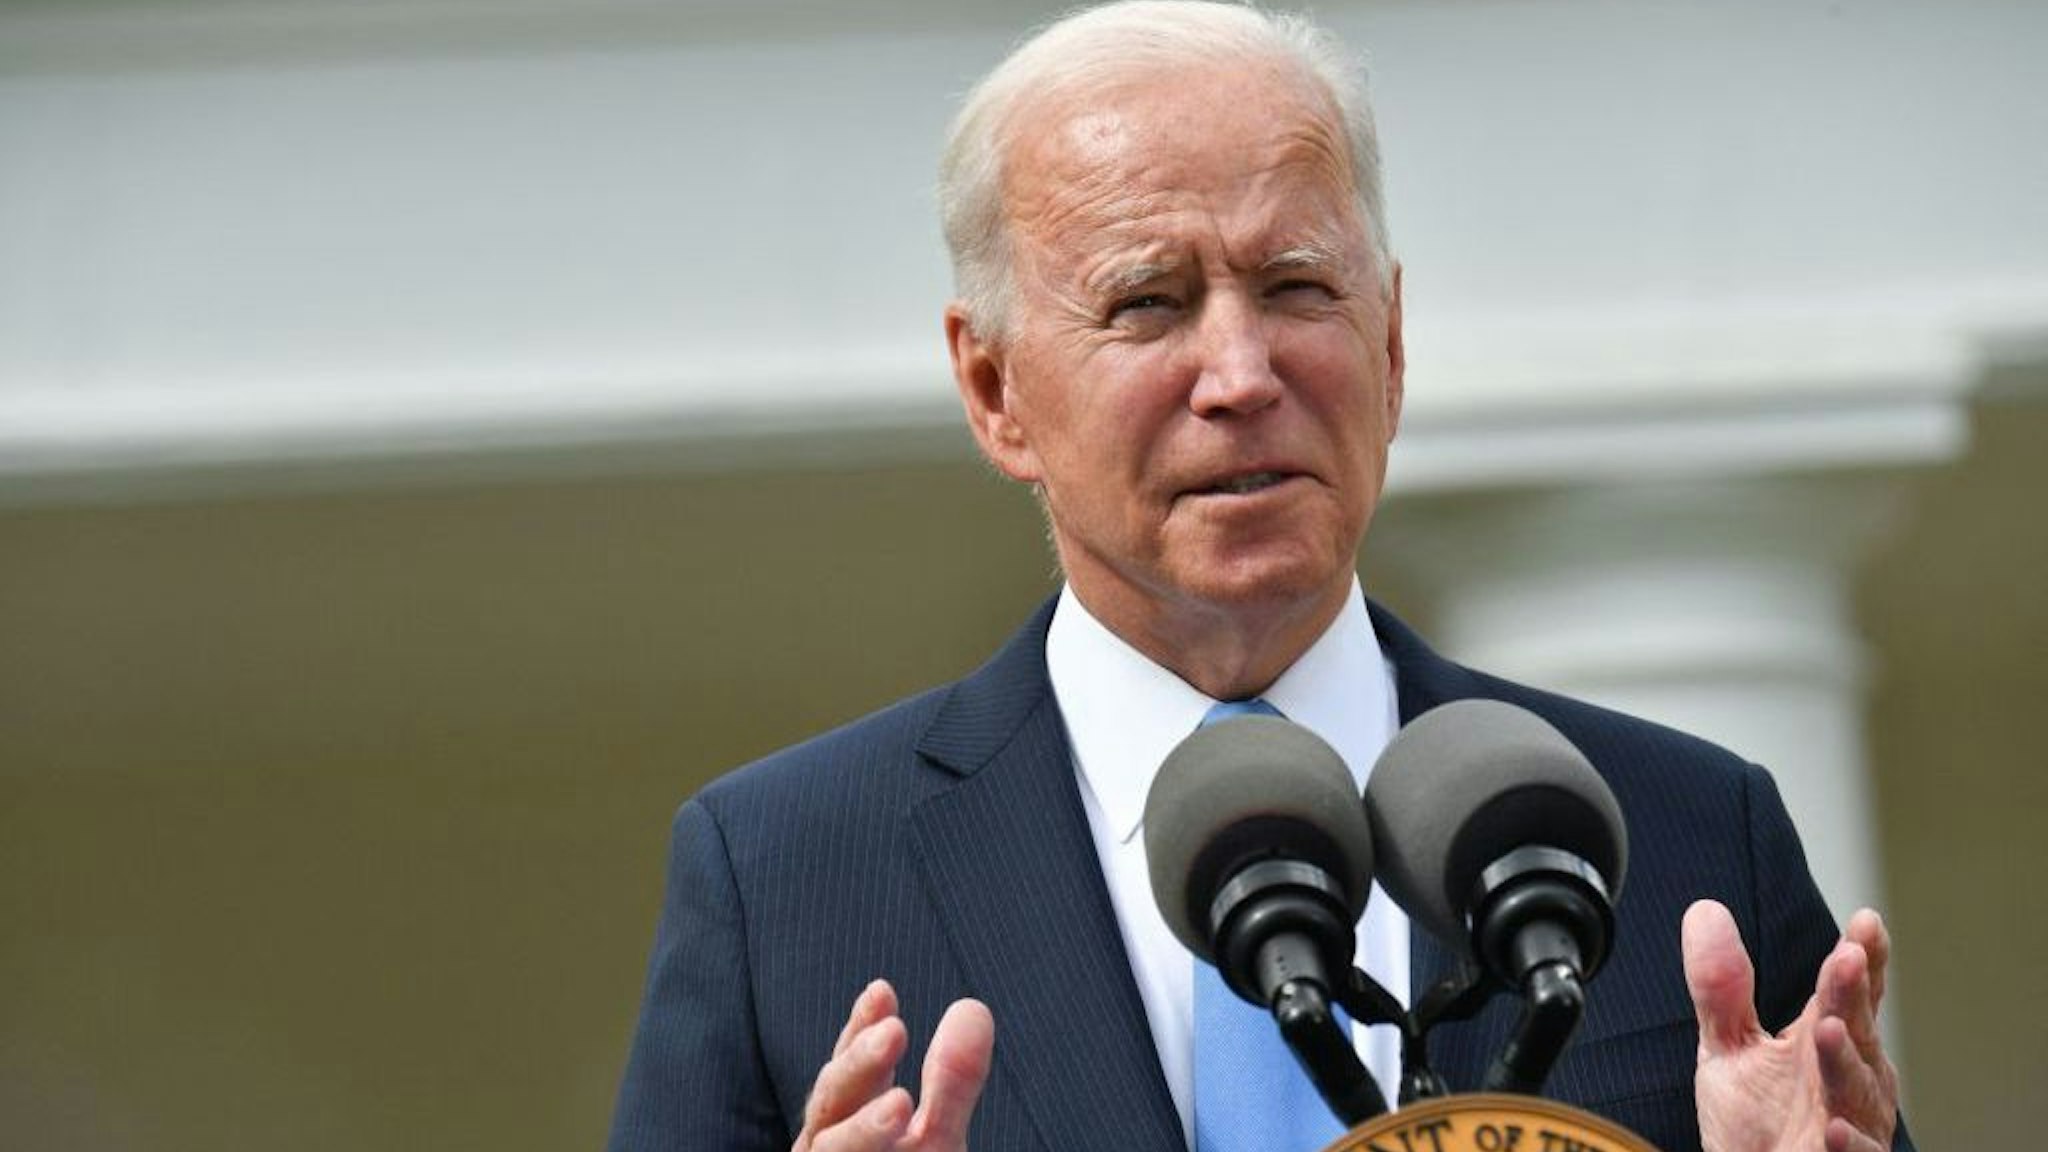 US President Joe Biden delivers remarks on Covid-19 response and the vaccination program, from the Rose Garden of the White House, Washington, DC on May 13, 2021. (Photo by Nicholas Kamm / AFP) (Photo by NICHOLAS KAMM/AFP via Getty Images)